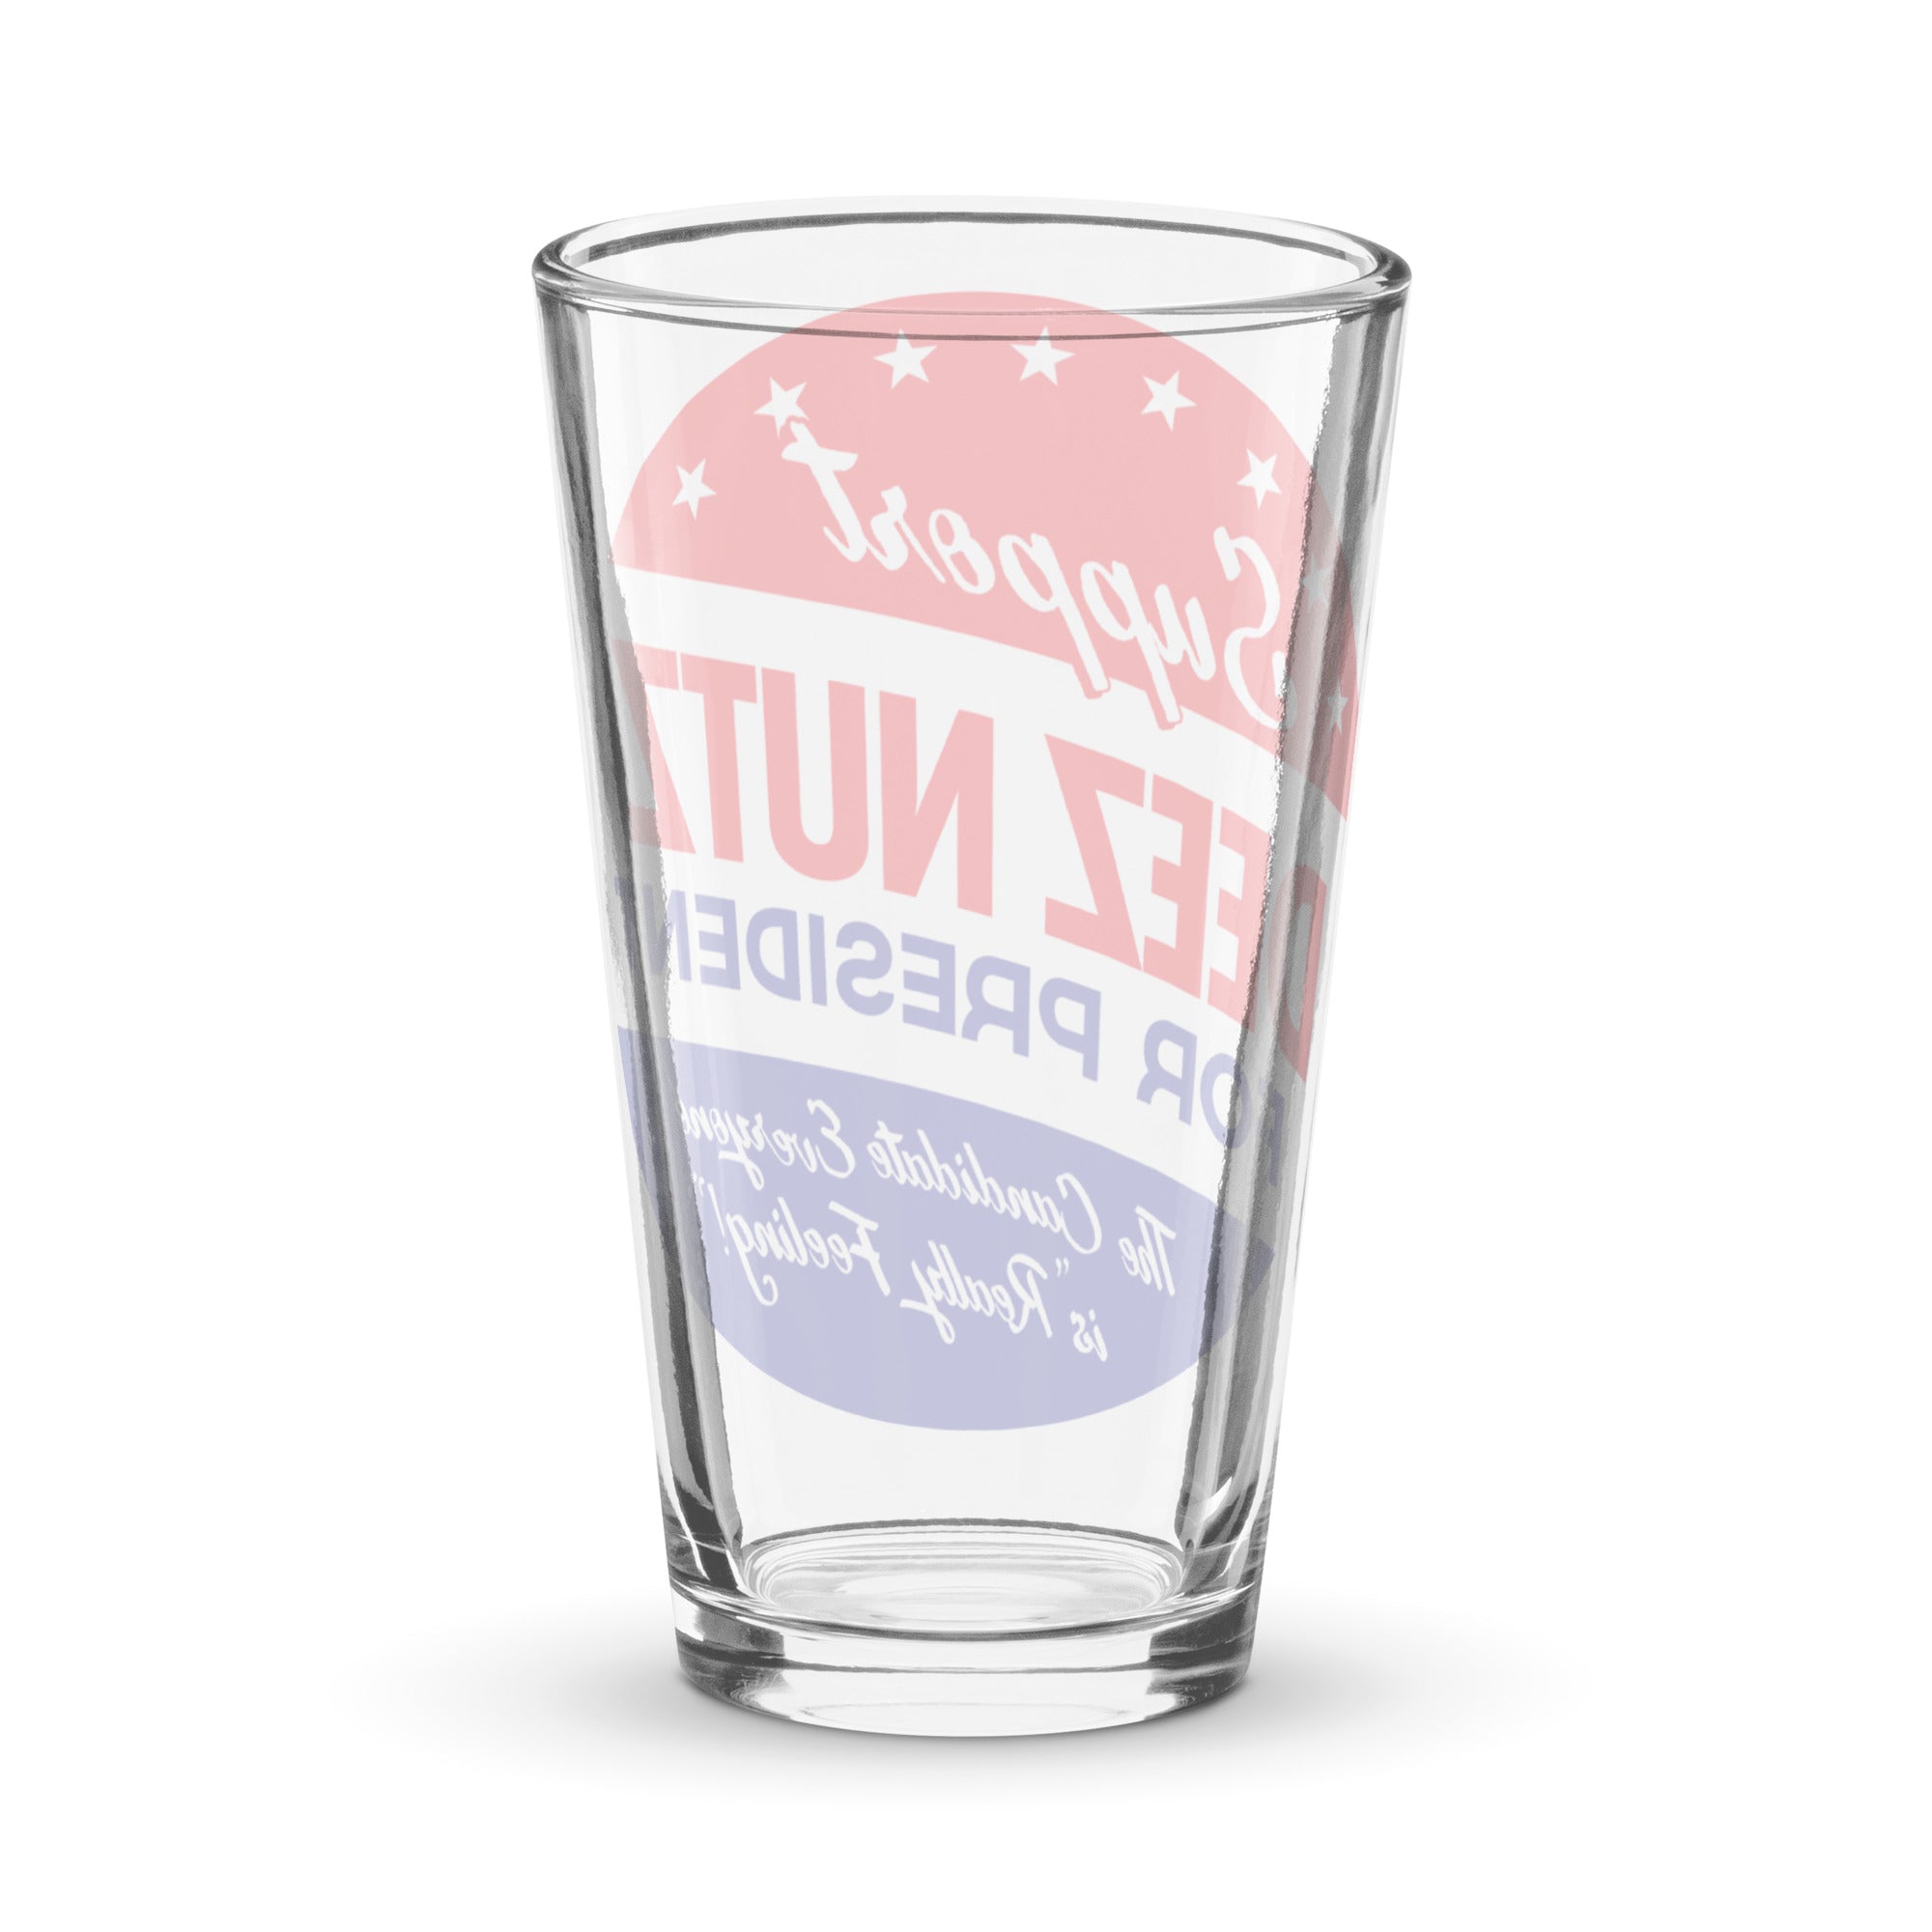 Deez Nuts for President Beer Glass